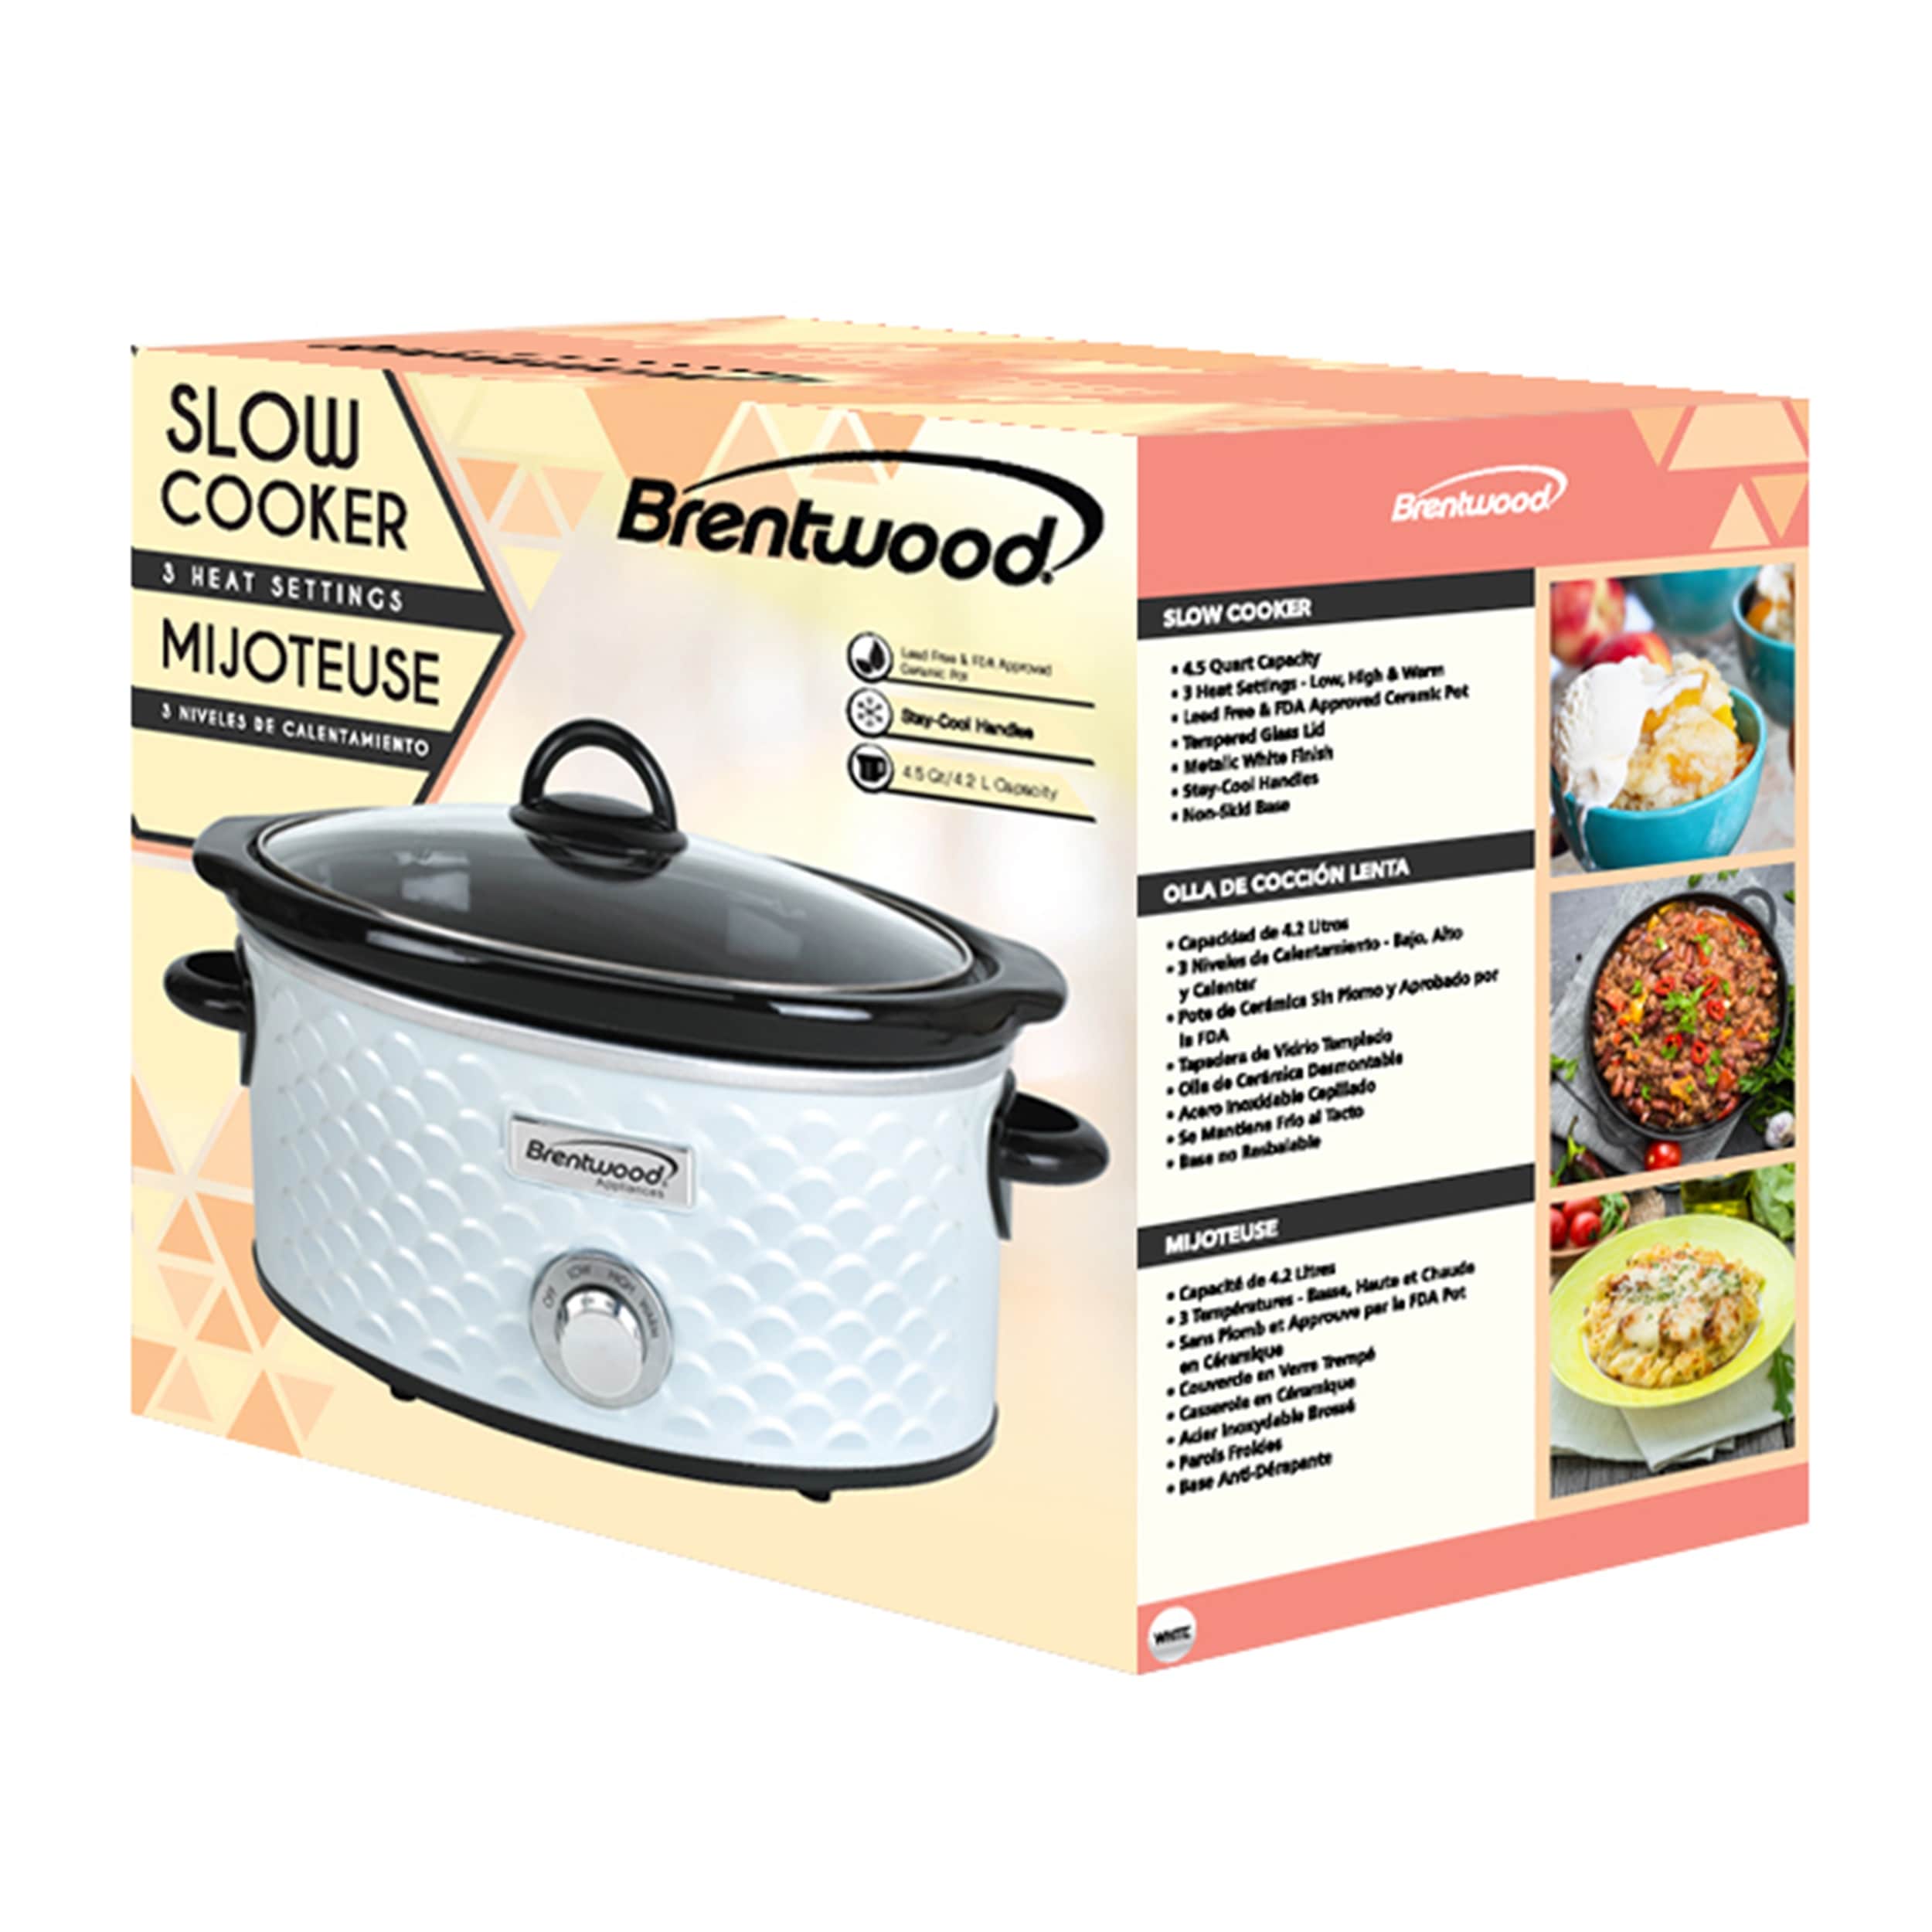 4.5 Quart Slow Cooker with Scallop Pattern in Stainless Steel